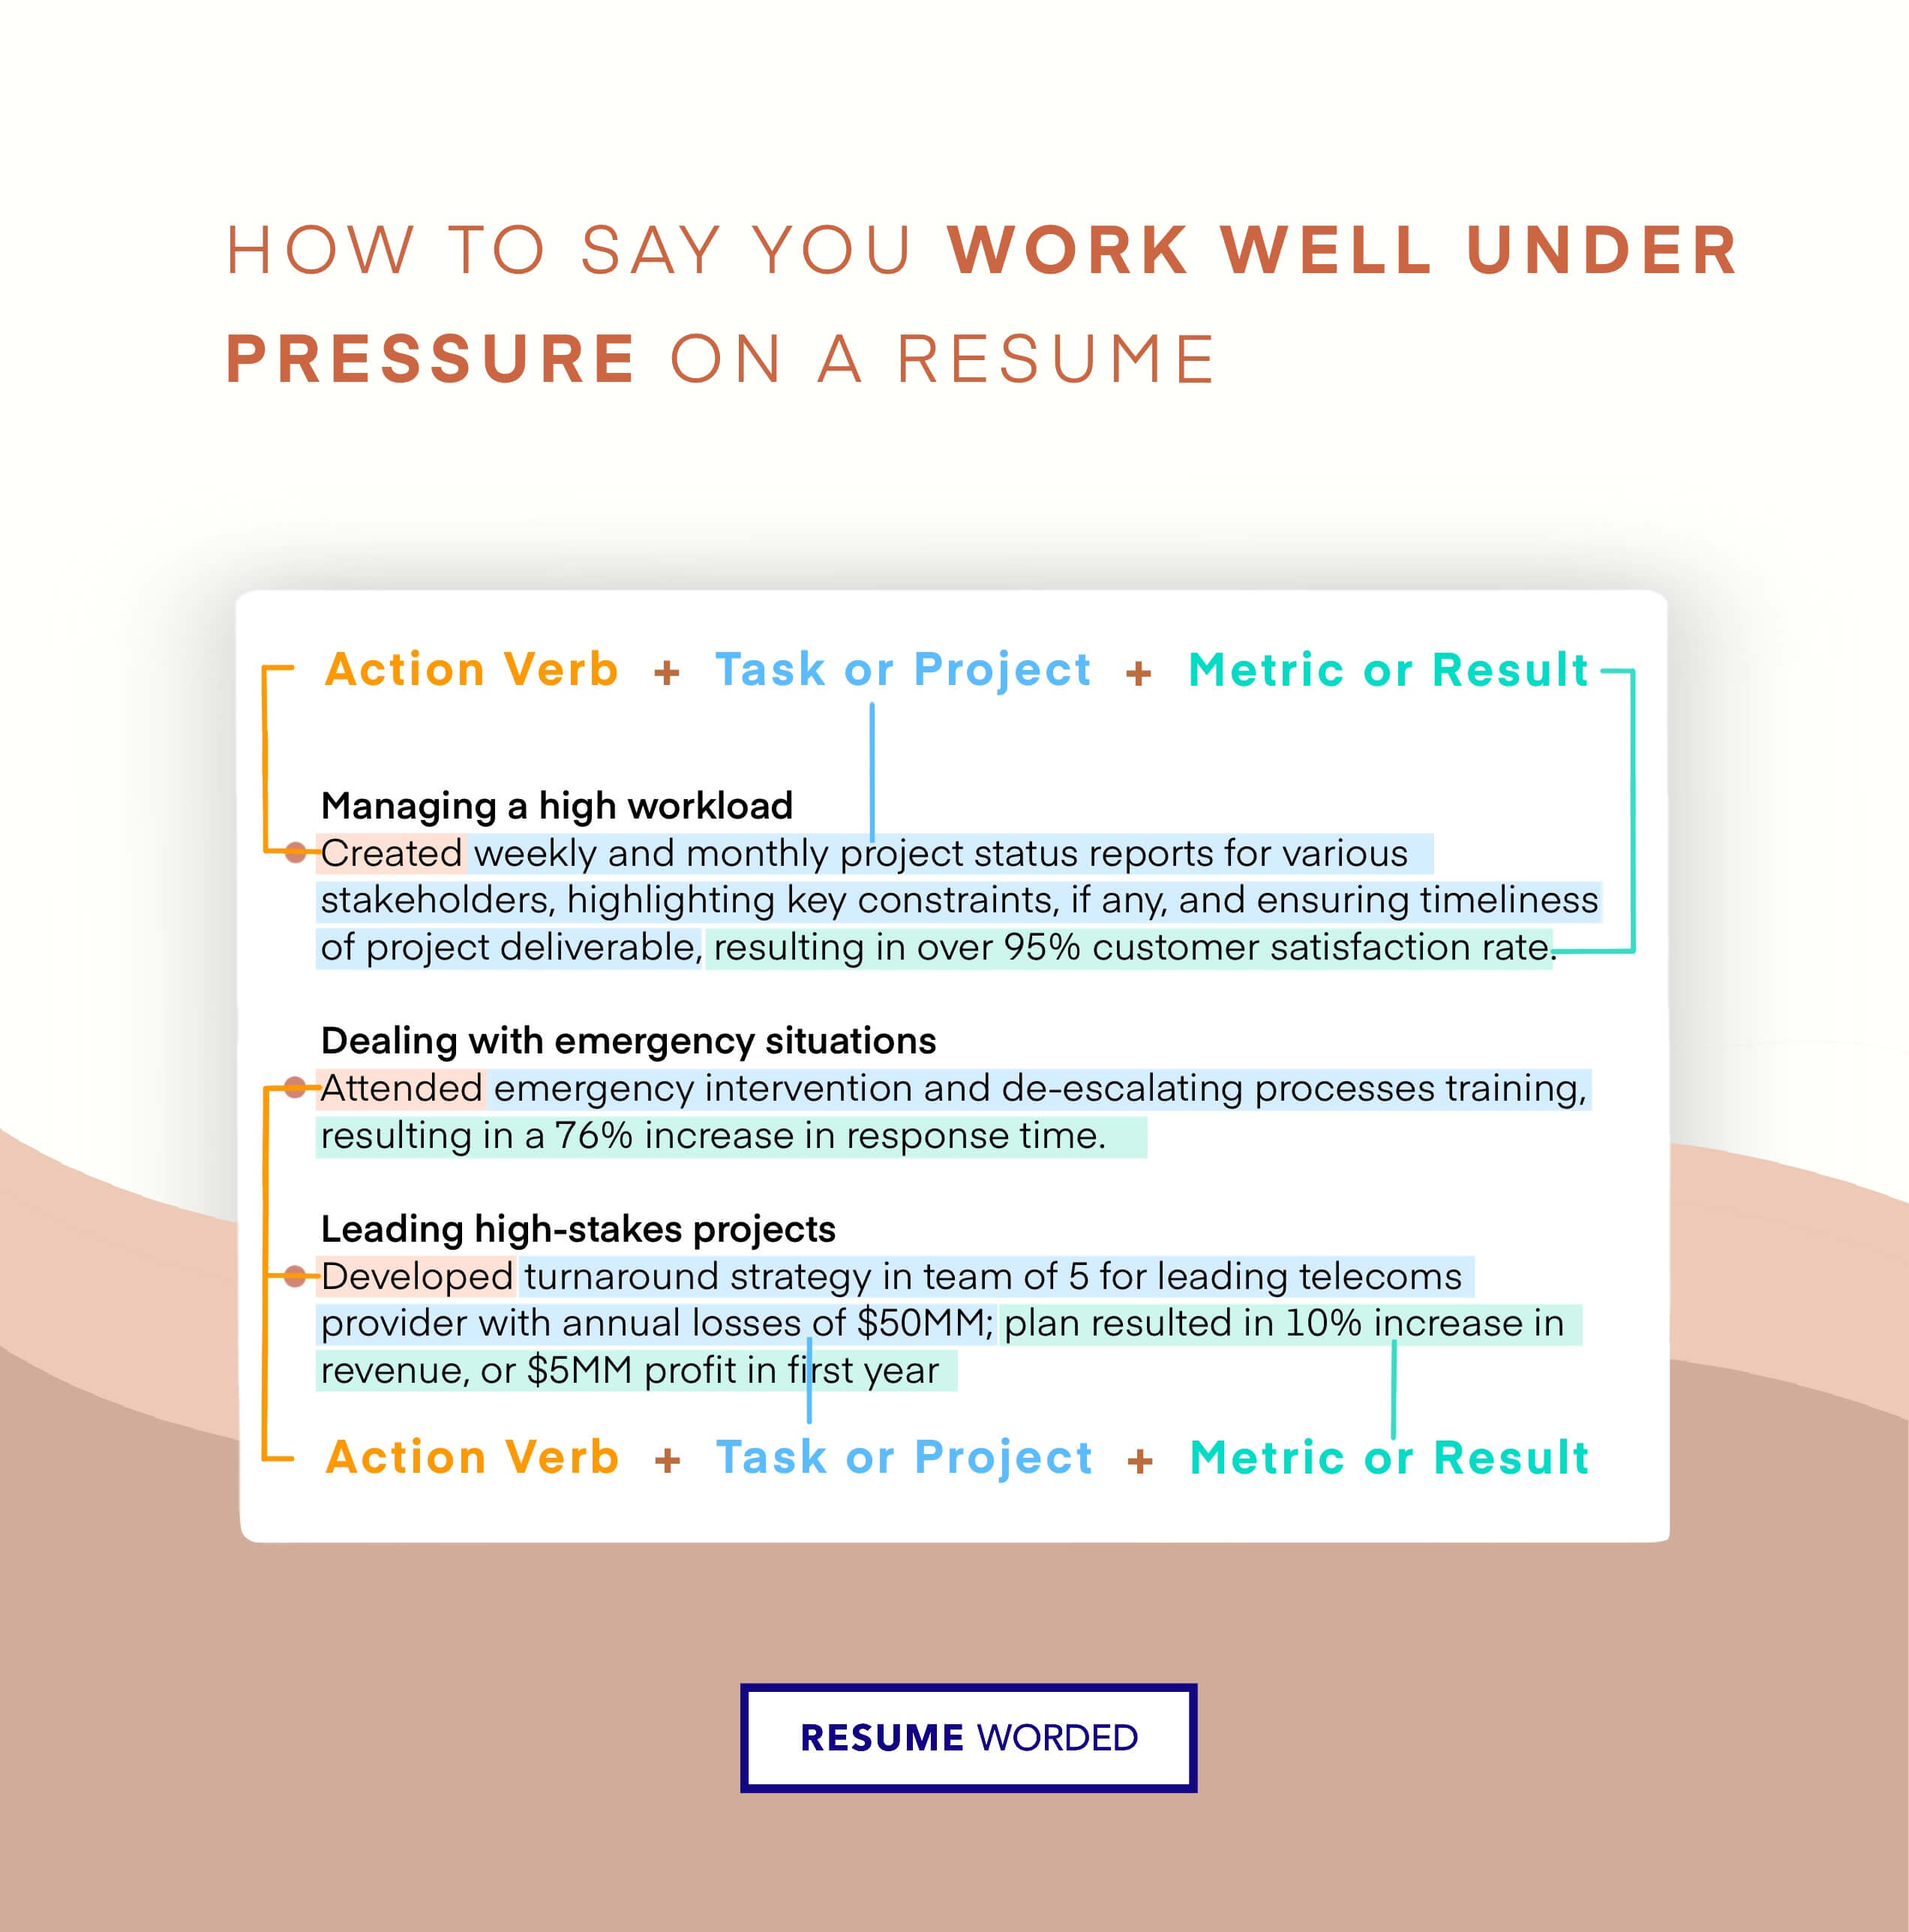 How To Write a Resume for a Fast-Paced Environment